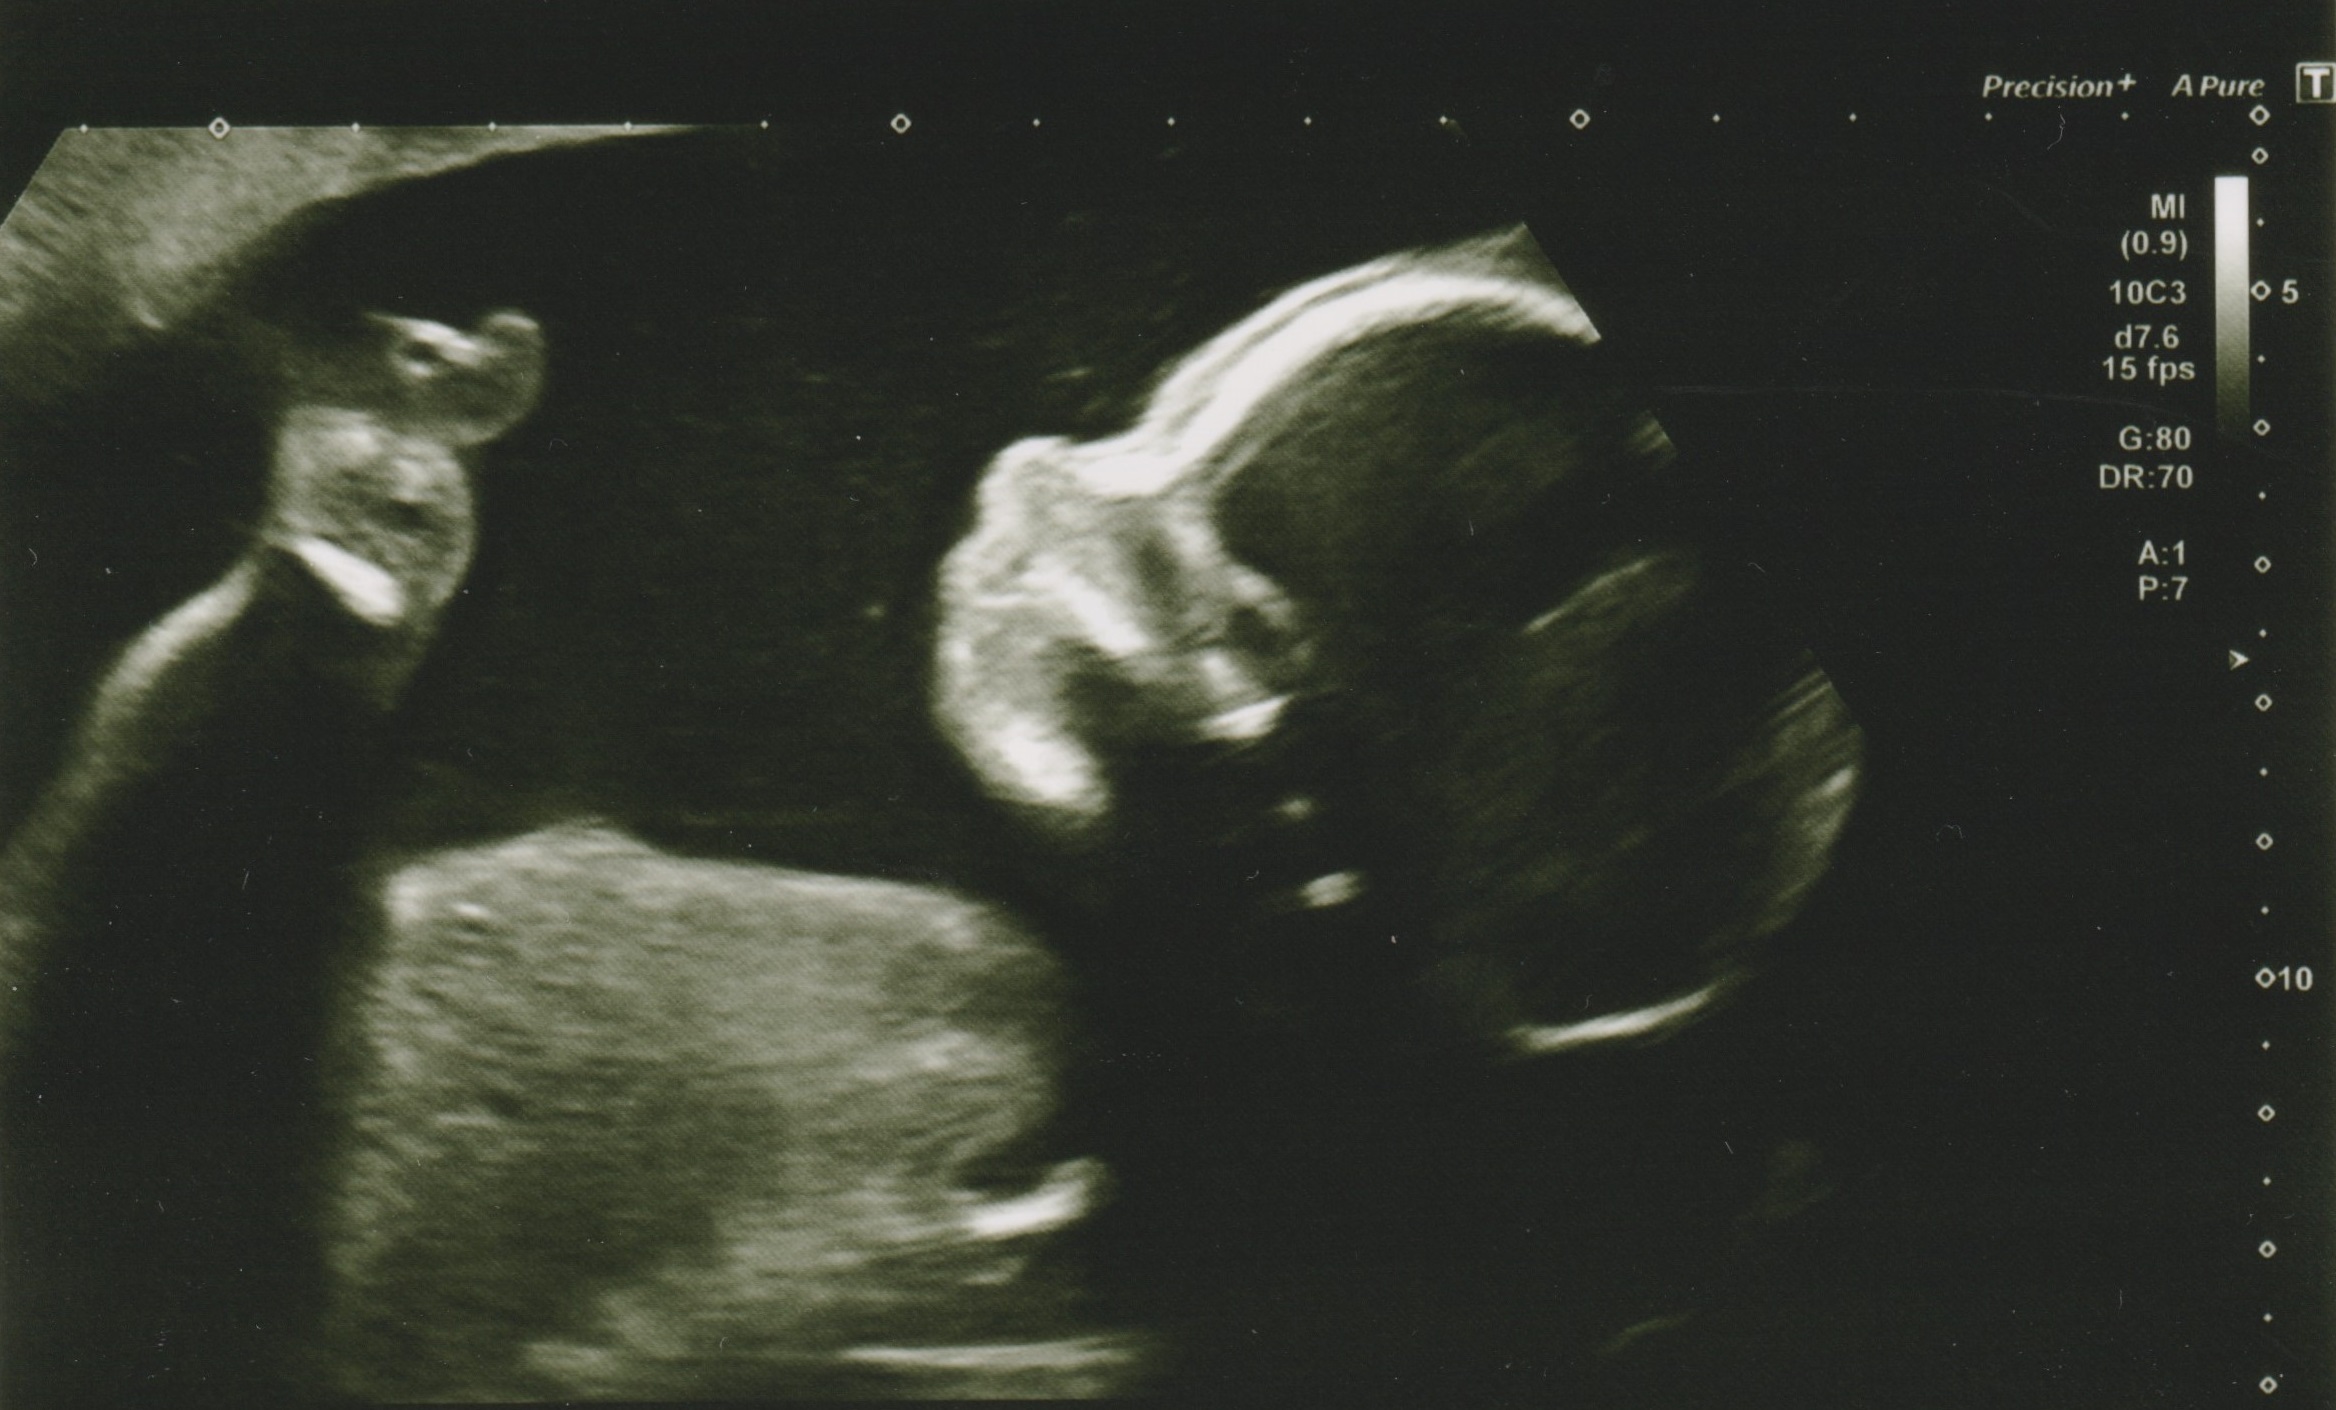 A screenshot from my wife's 20-week scan